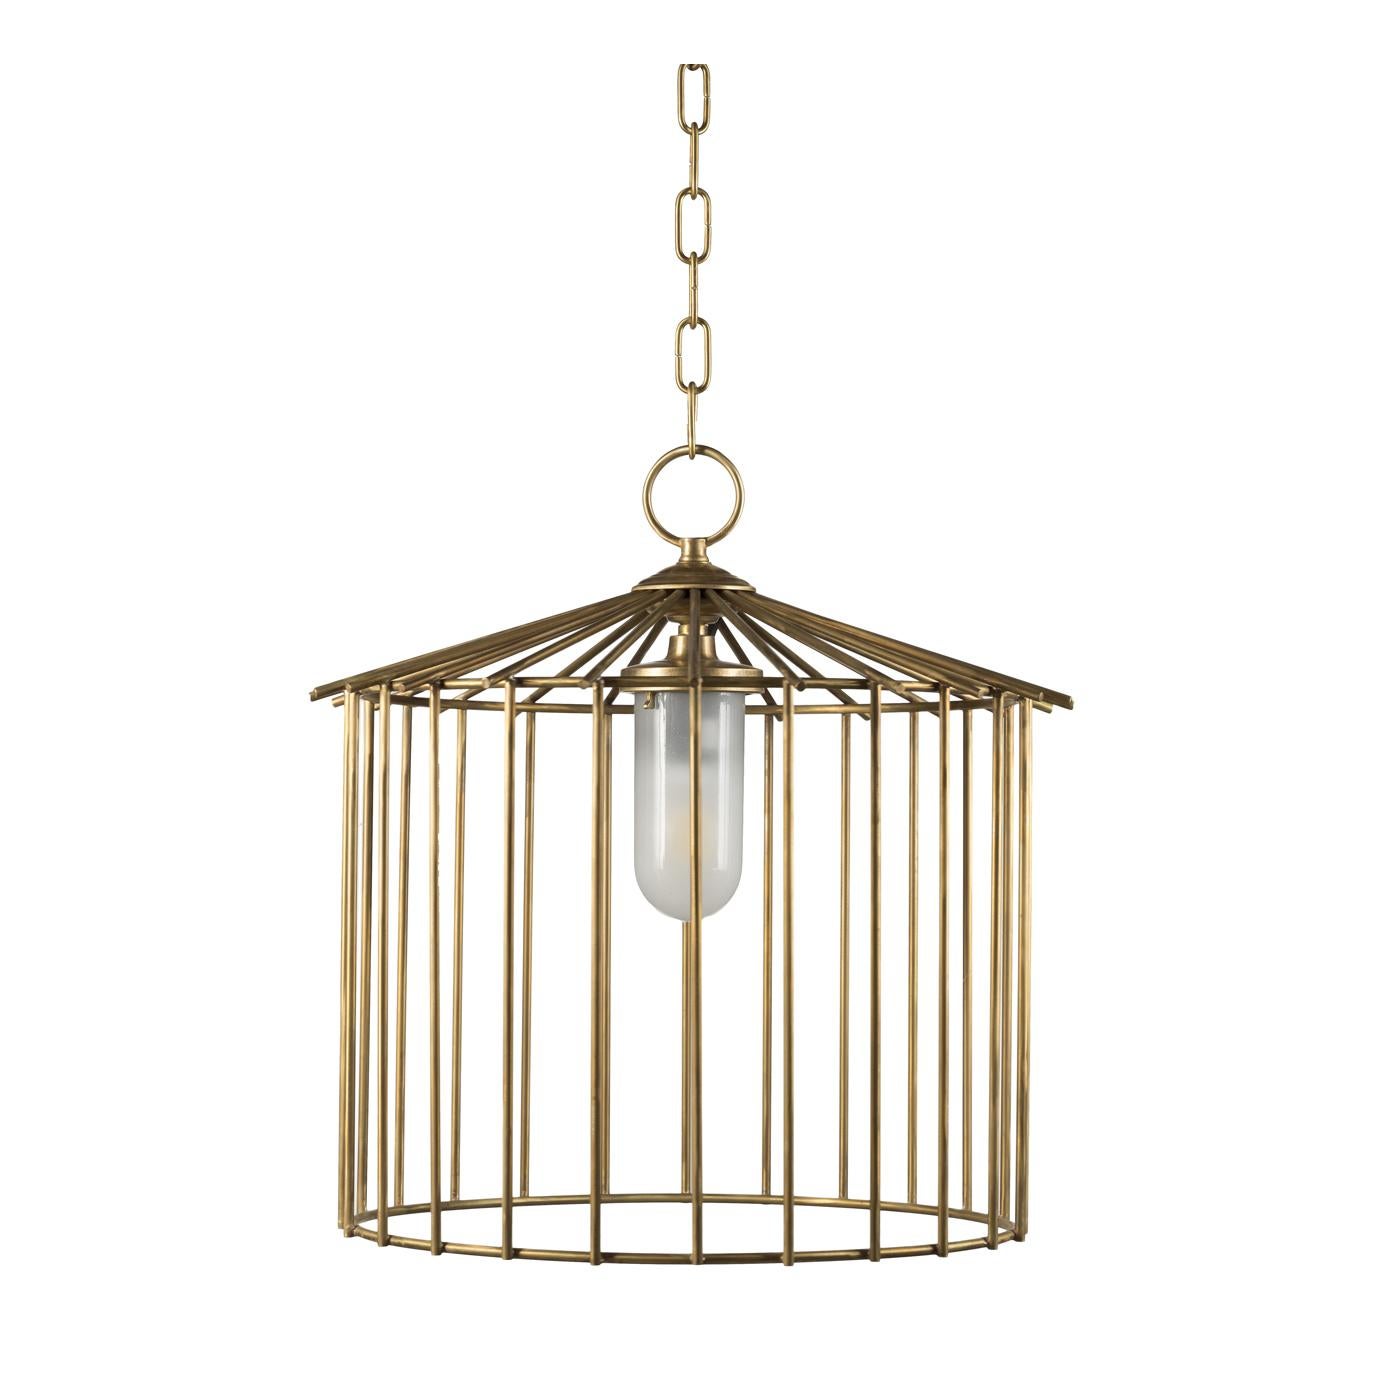 Cage 1 Medium Ceiling Lamp In New Condition For Sale In Milan, IT